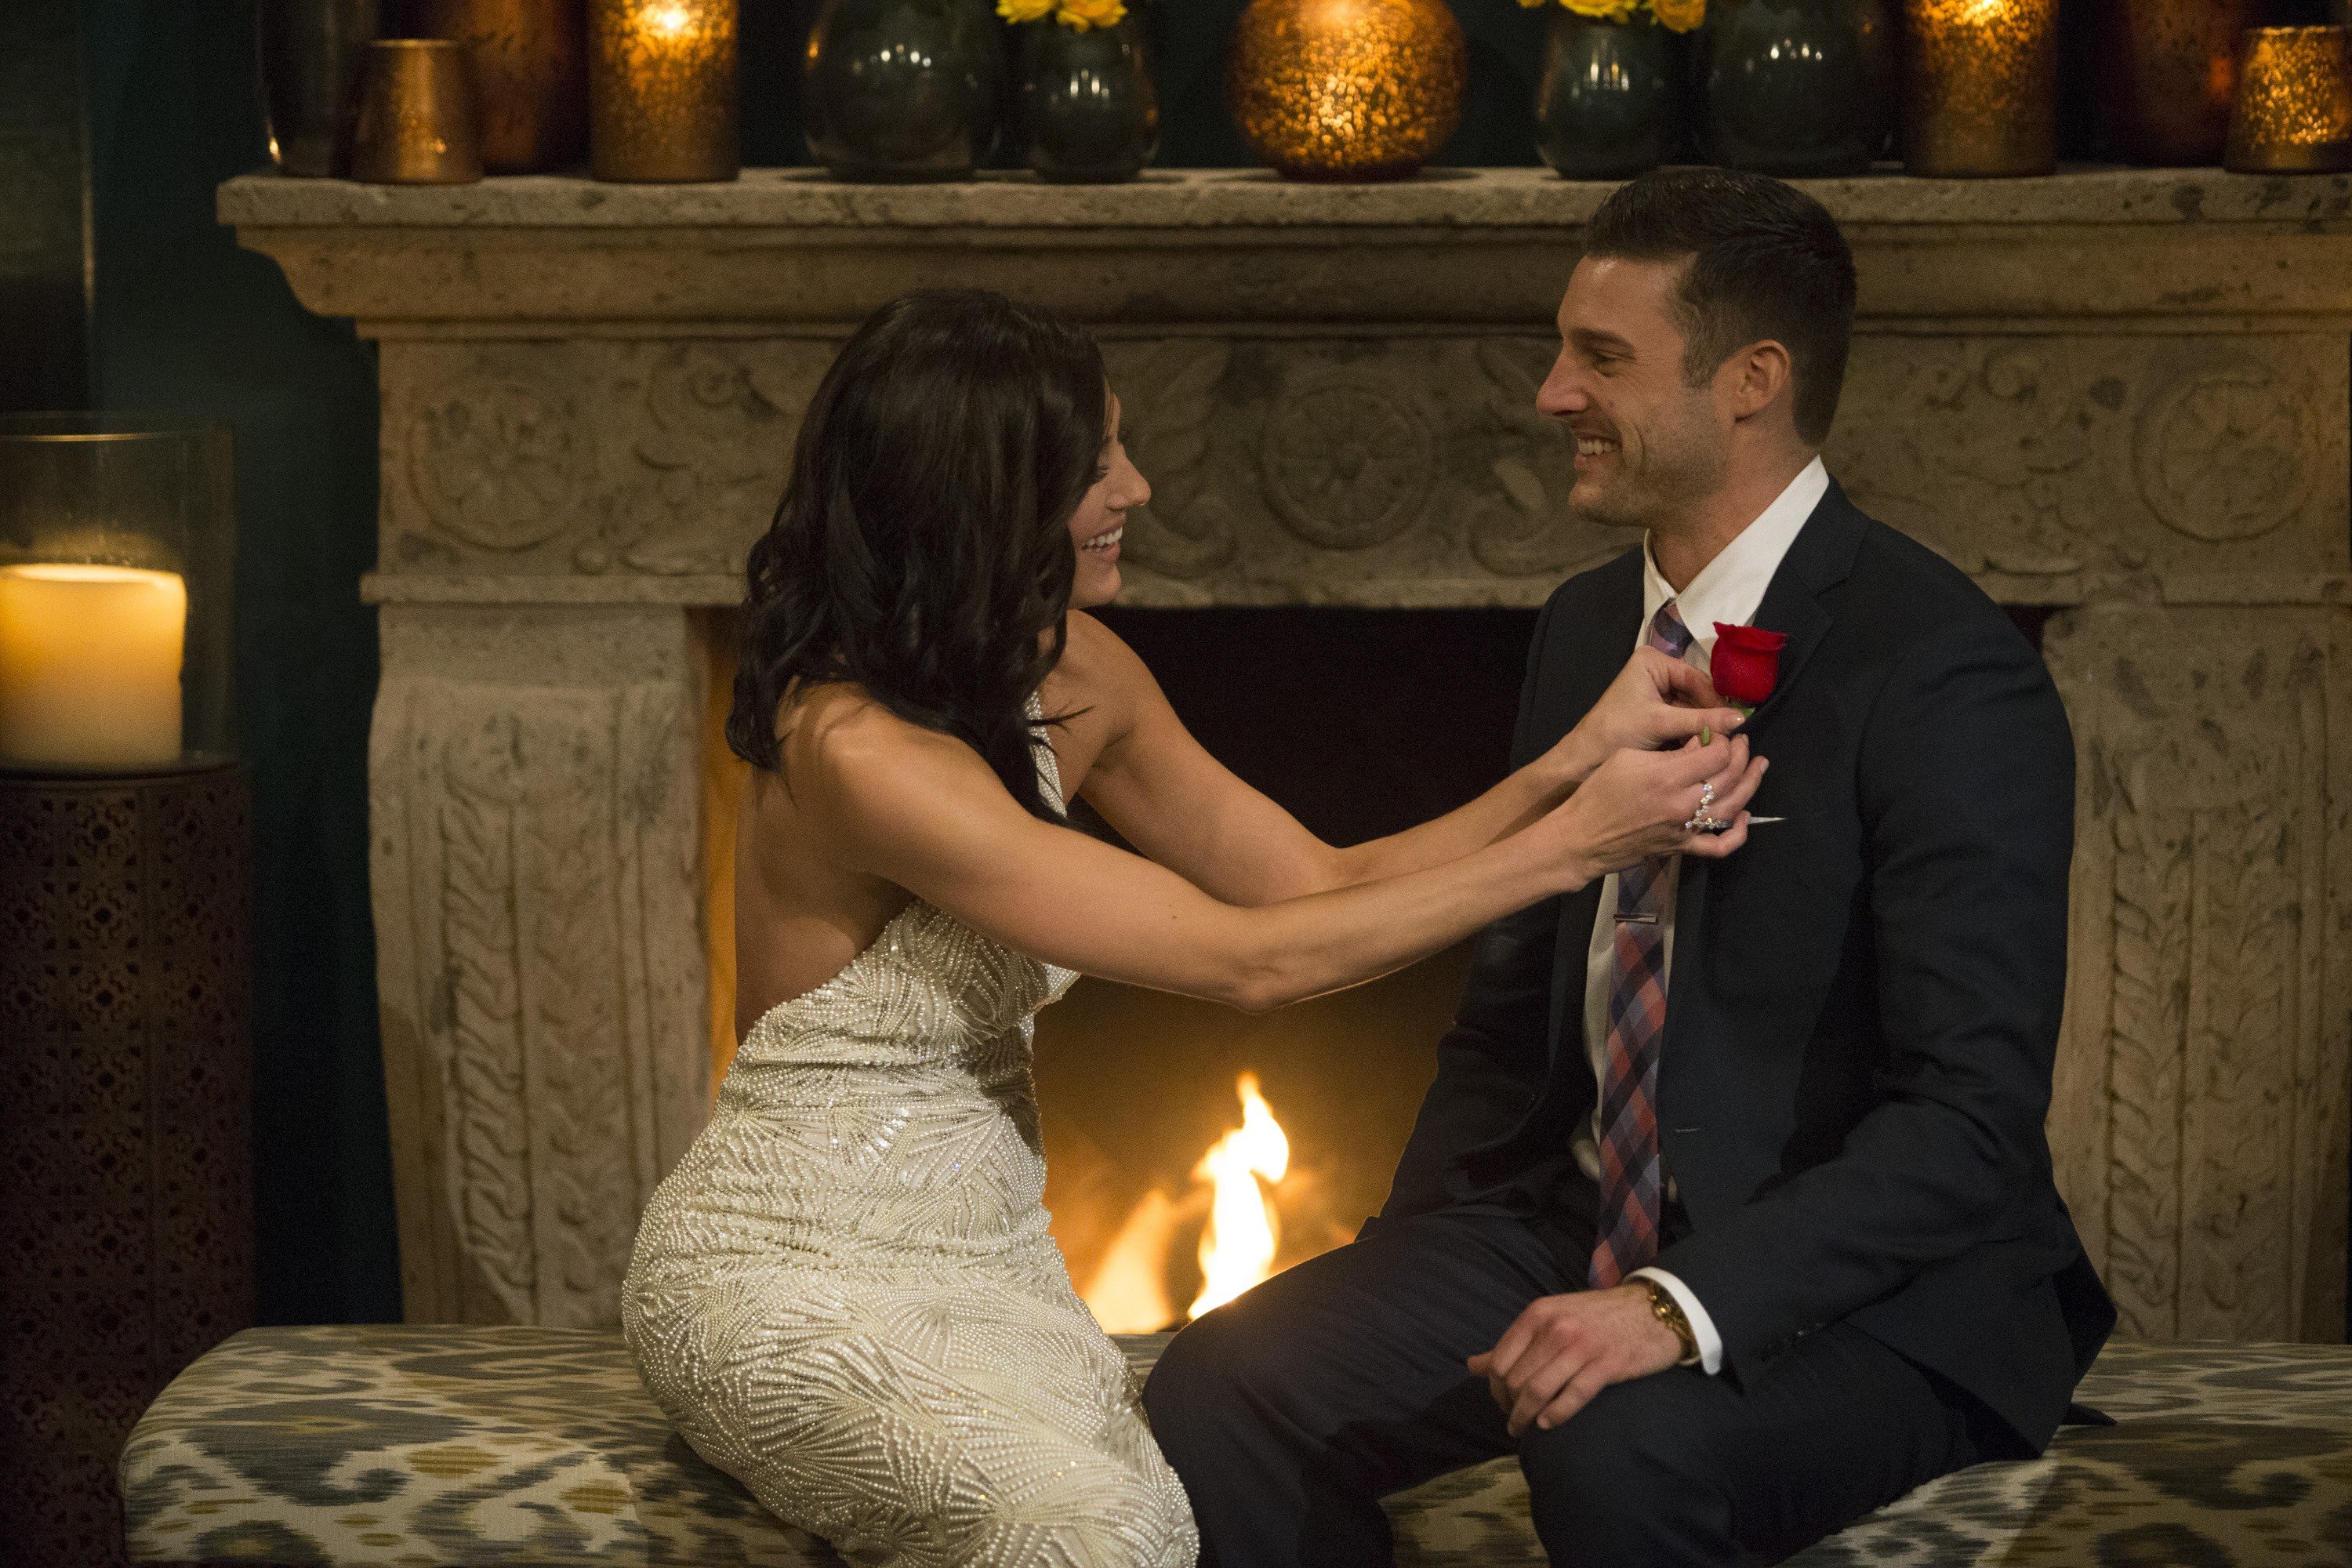 THE BACHELORETTE - "Episode 1401" - Fan favorite Becca Kufrin captured AmericaÕs heart when she found herself at the center of one of the most gut-wrenching Bachelor breakups of all time. Now the Minnesota girl next door returns for a second shot at love and gets to hand out the roses, searching for her happily-ever-after in the 14th edition of ABCÕs hit series ÒThe Bachelorette,Ó premiering MONDAY, MAY 28 (8:00-10:01 p.m. EDT), on The ABC Television Network. (ABC/Paul Hebert)<br />